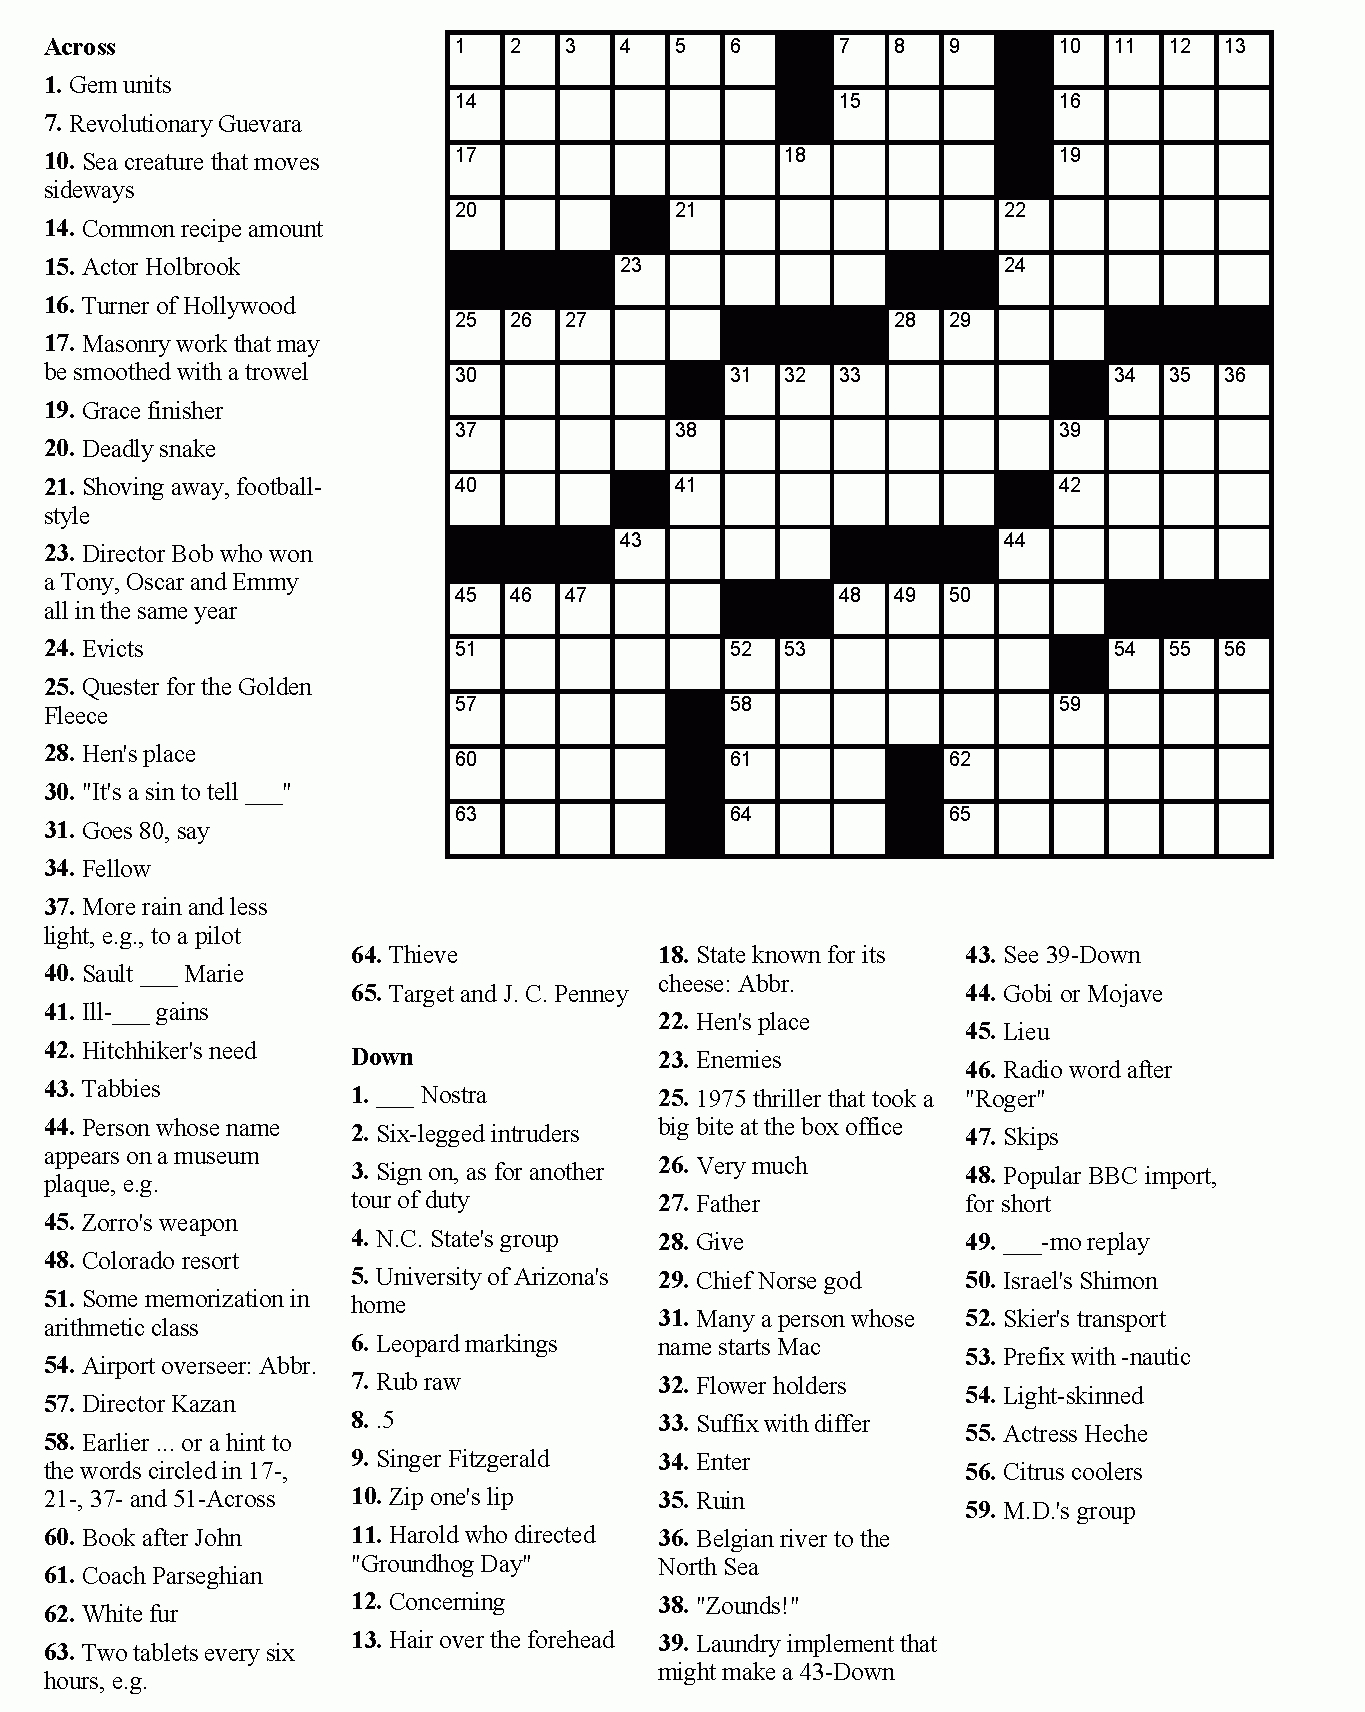 Free Printable Crossword Puzzles Easy For Adults | My Board - Free Printable Crossword Puzzles For Adults